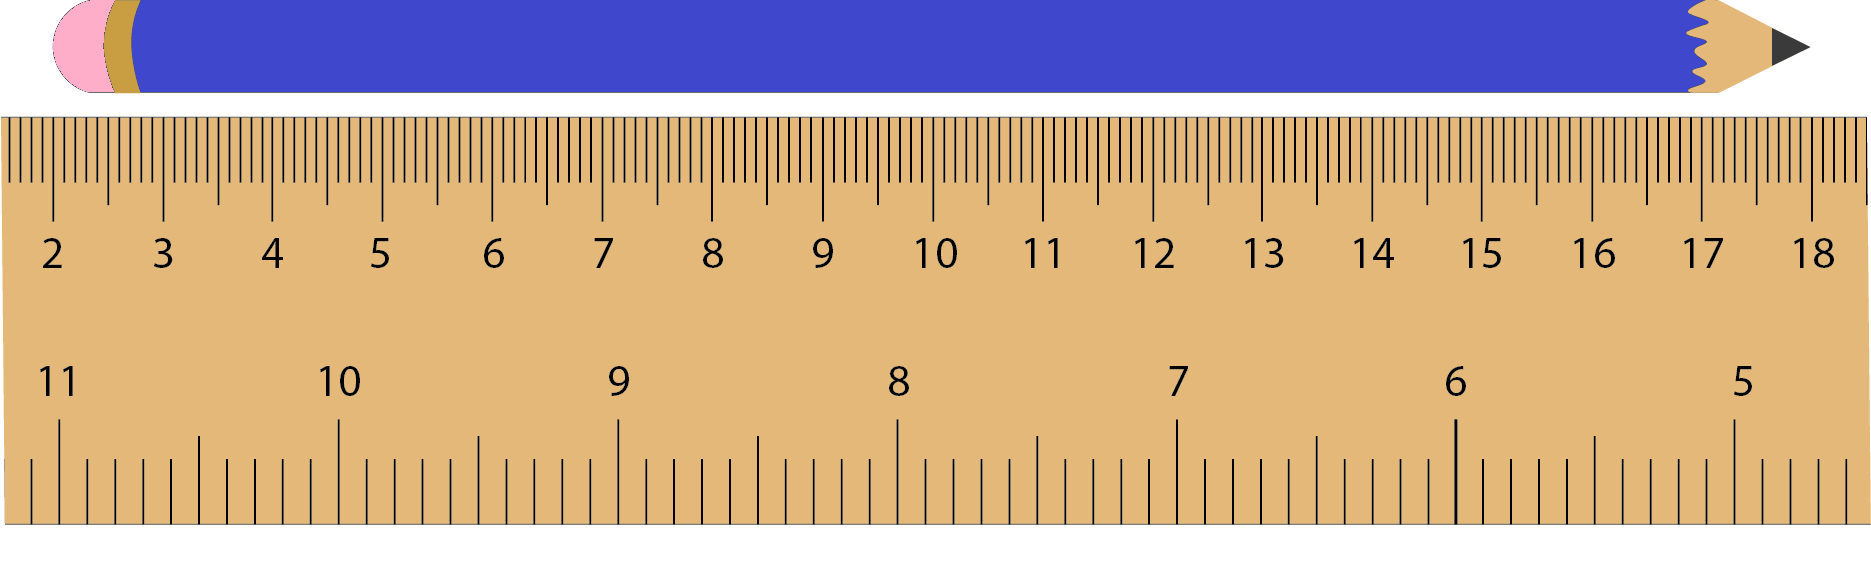 Image of a ruler being used to measure the length of a pencil. 